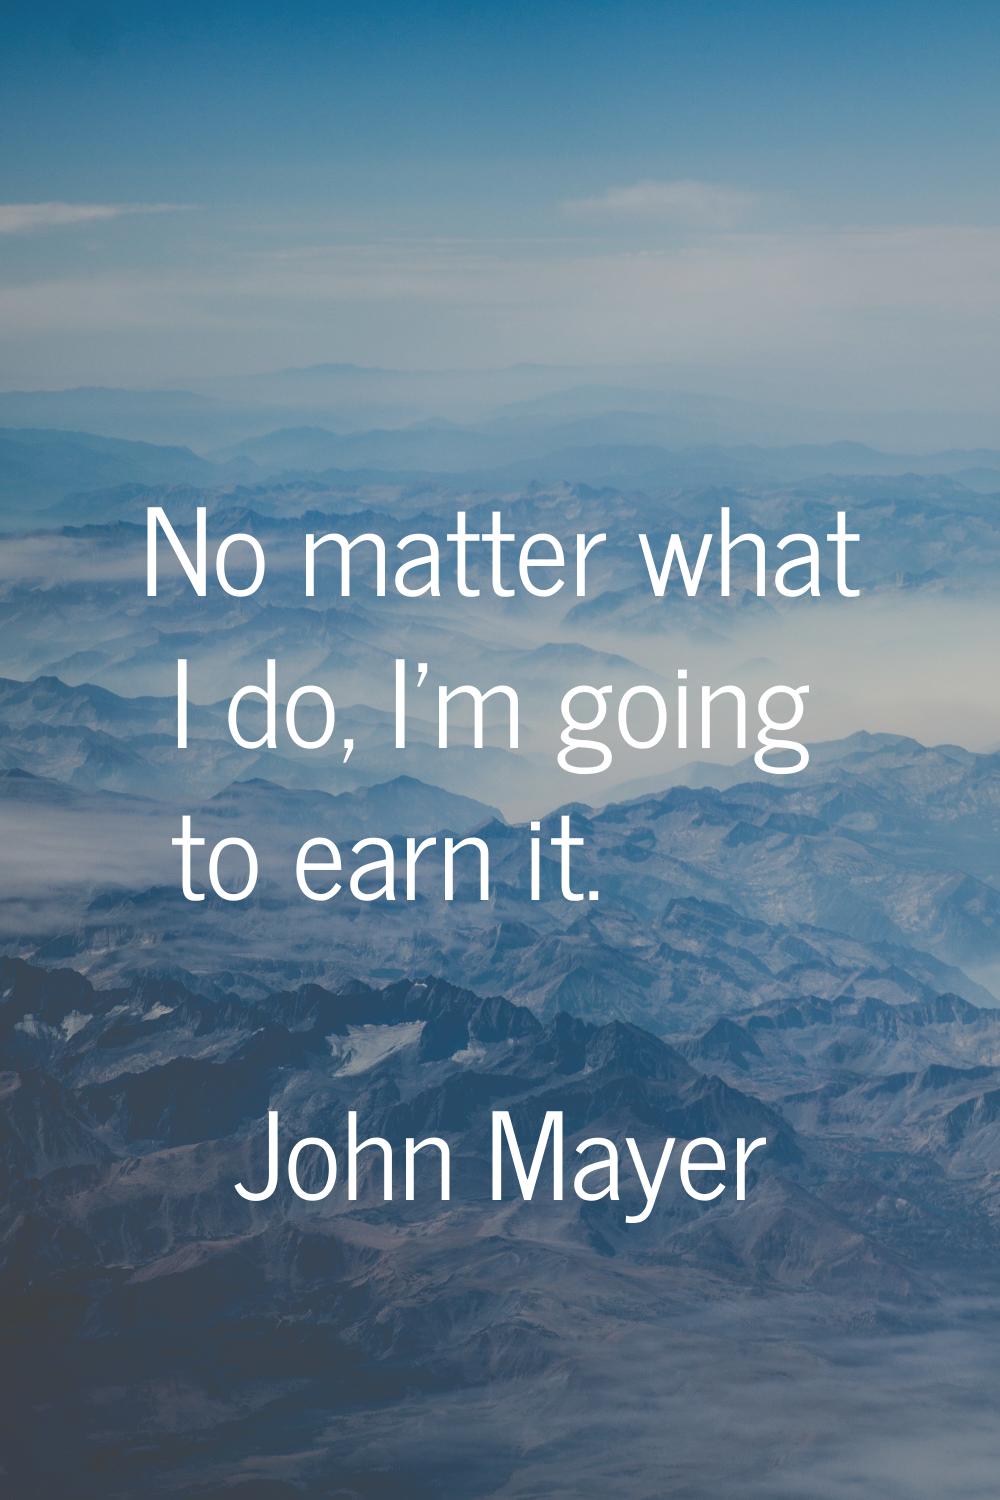 No matter what I do, I'm going to earn it.